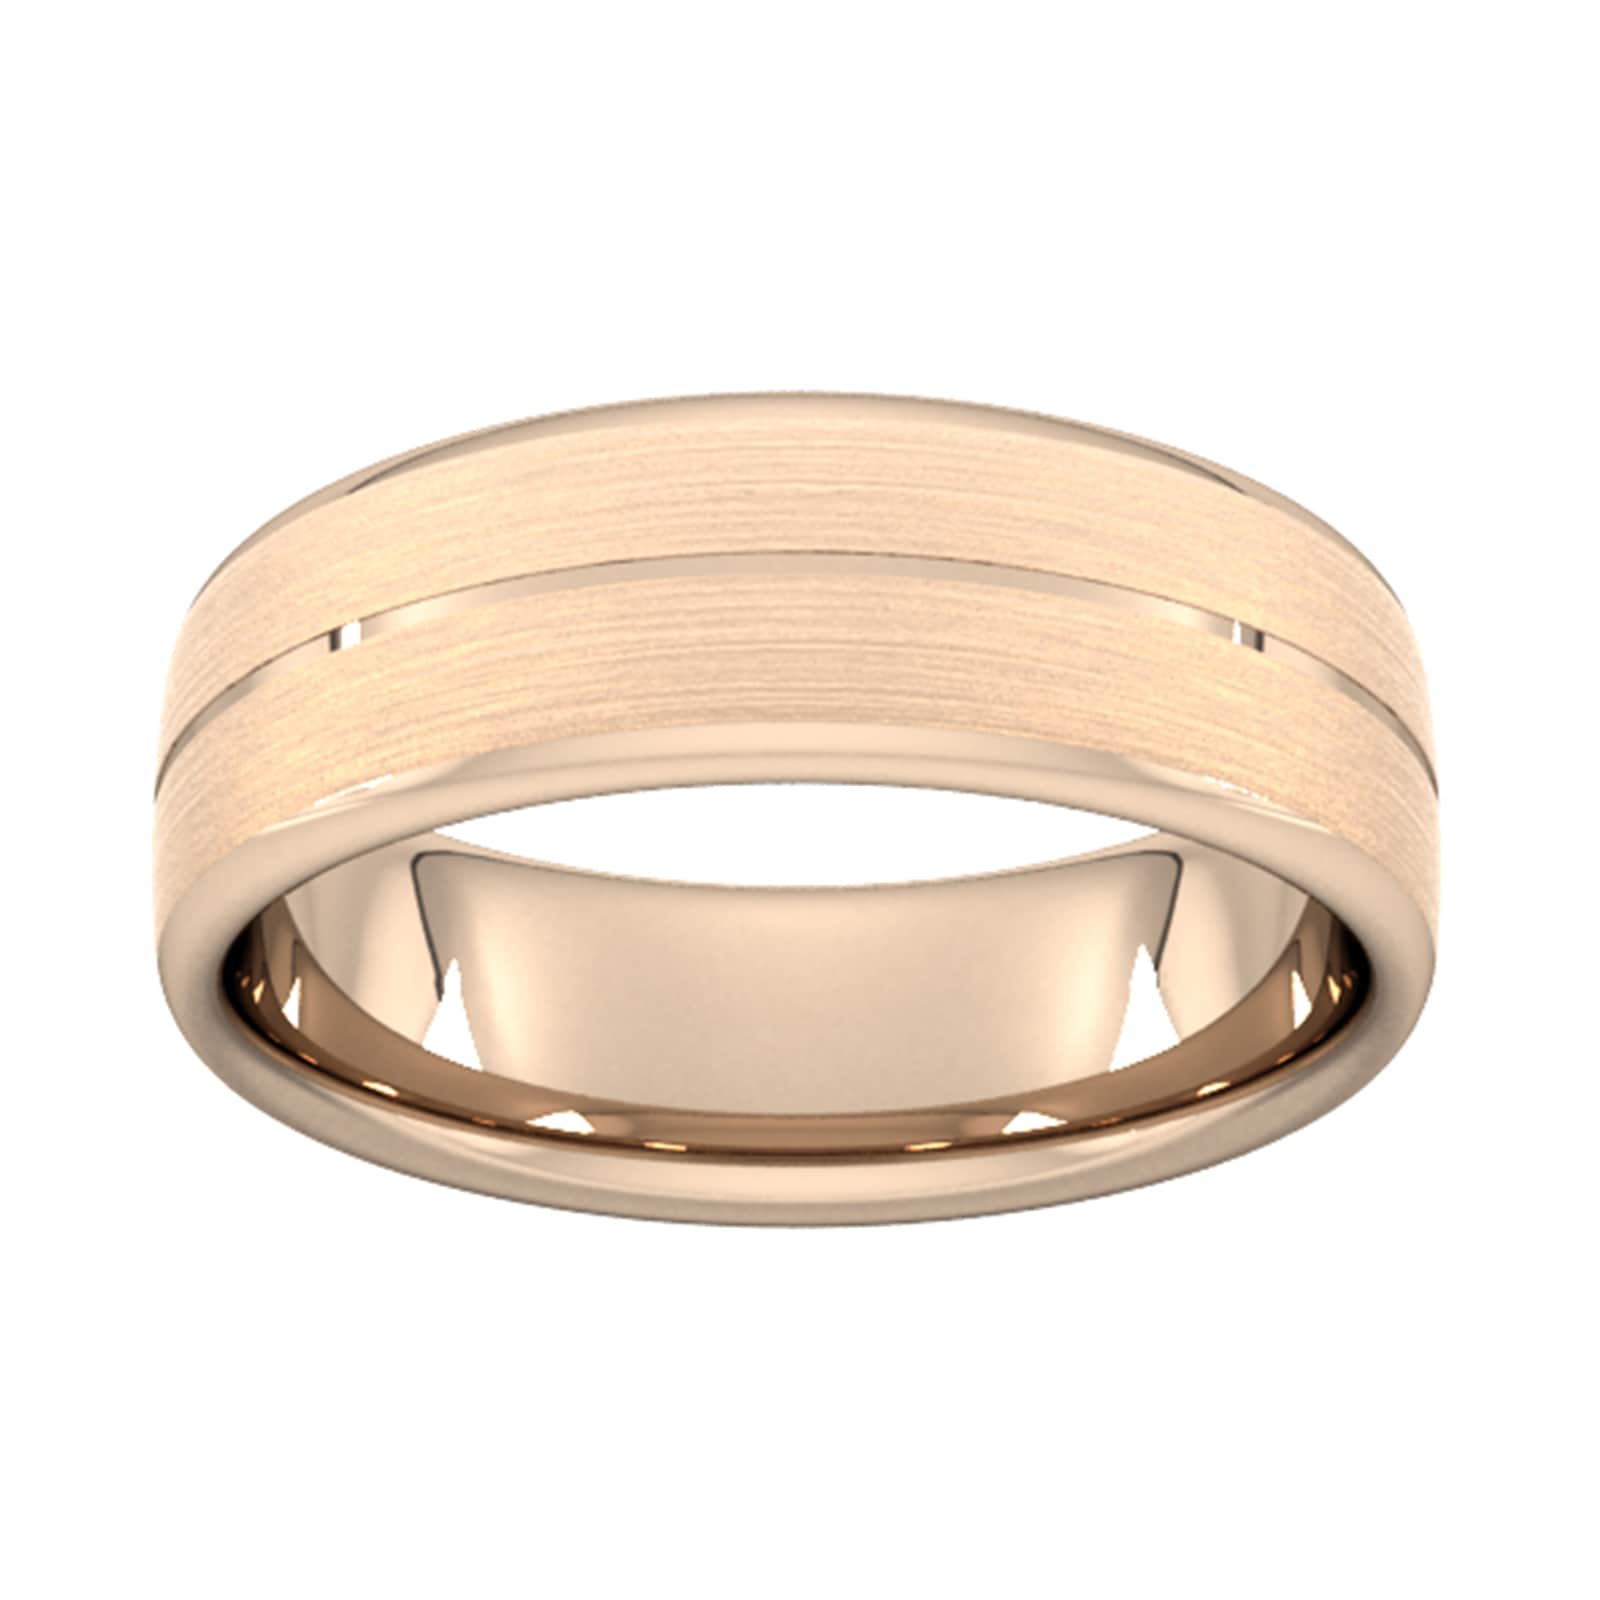 7mm Flat Court Heavy Centre Groove With Chamfered Edge Wedding Ring In 18 Carat Rose Gold - Ring Size S